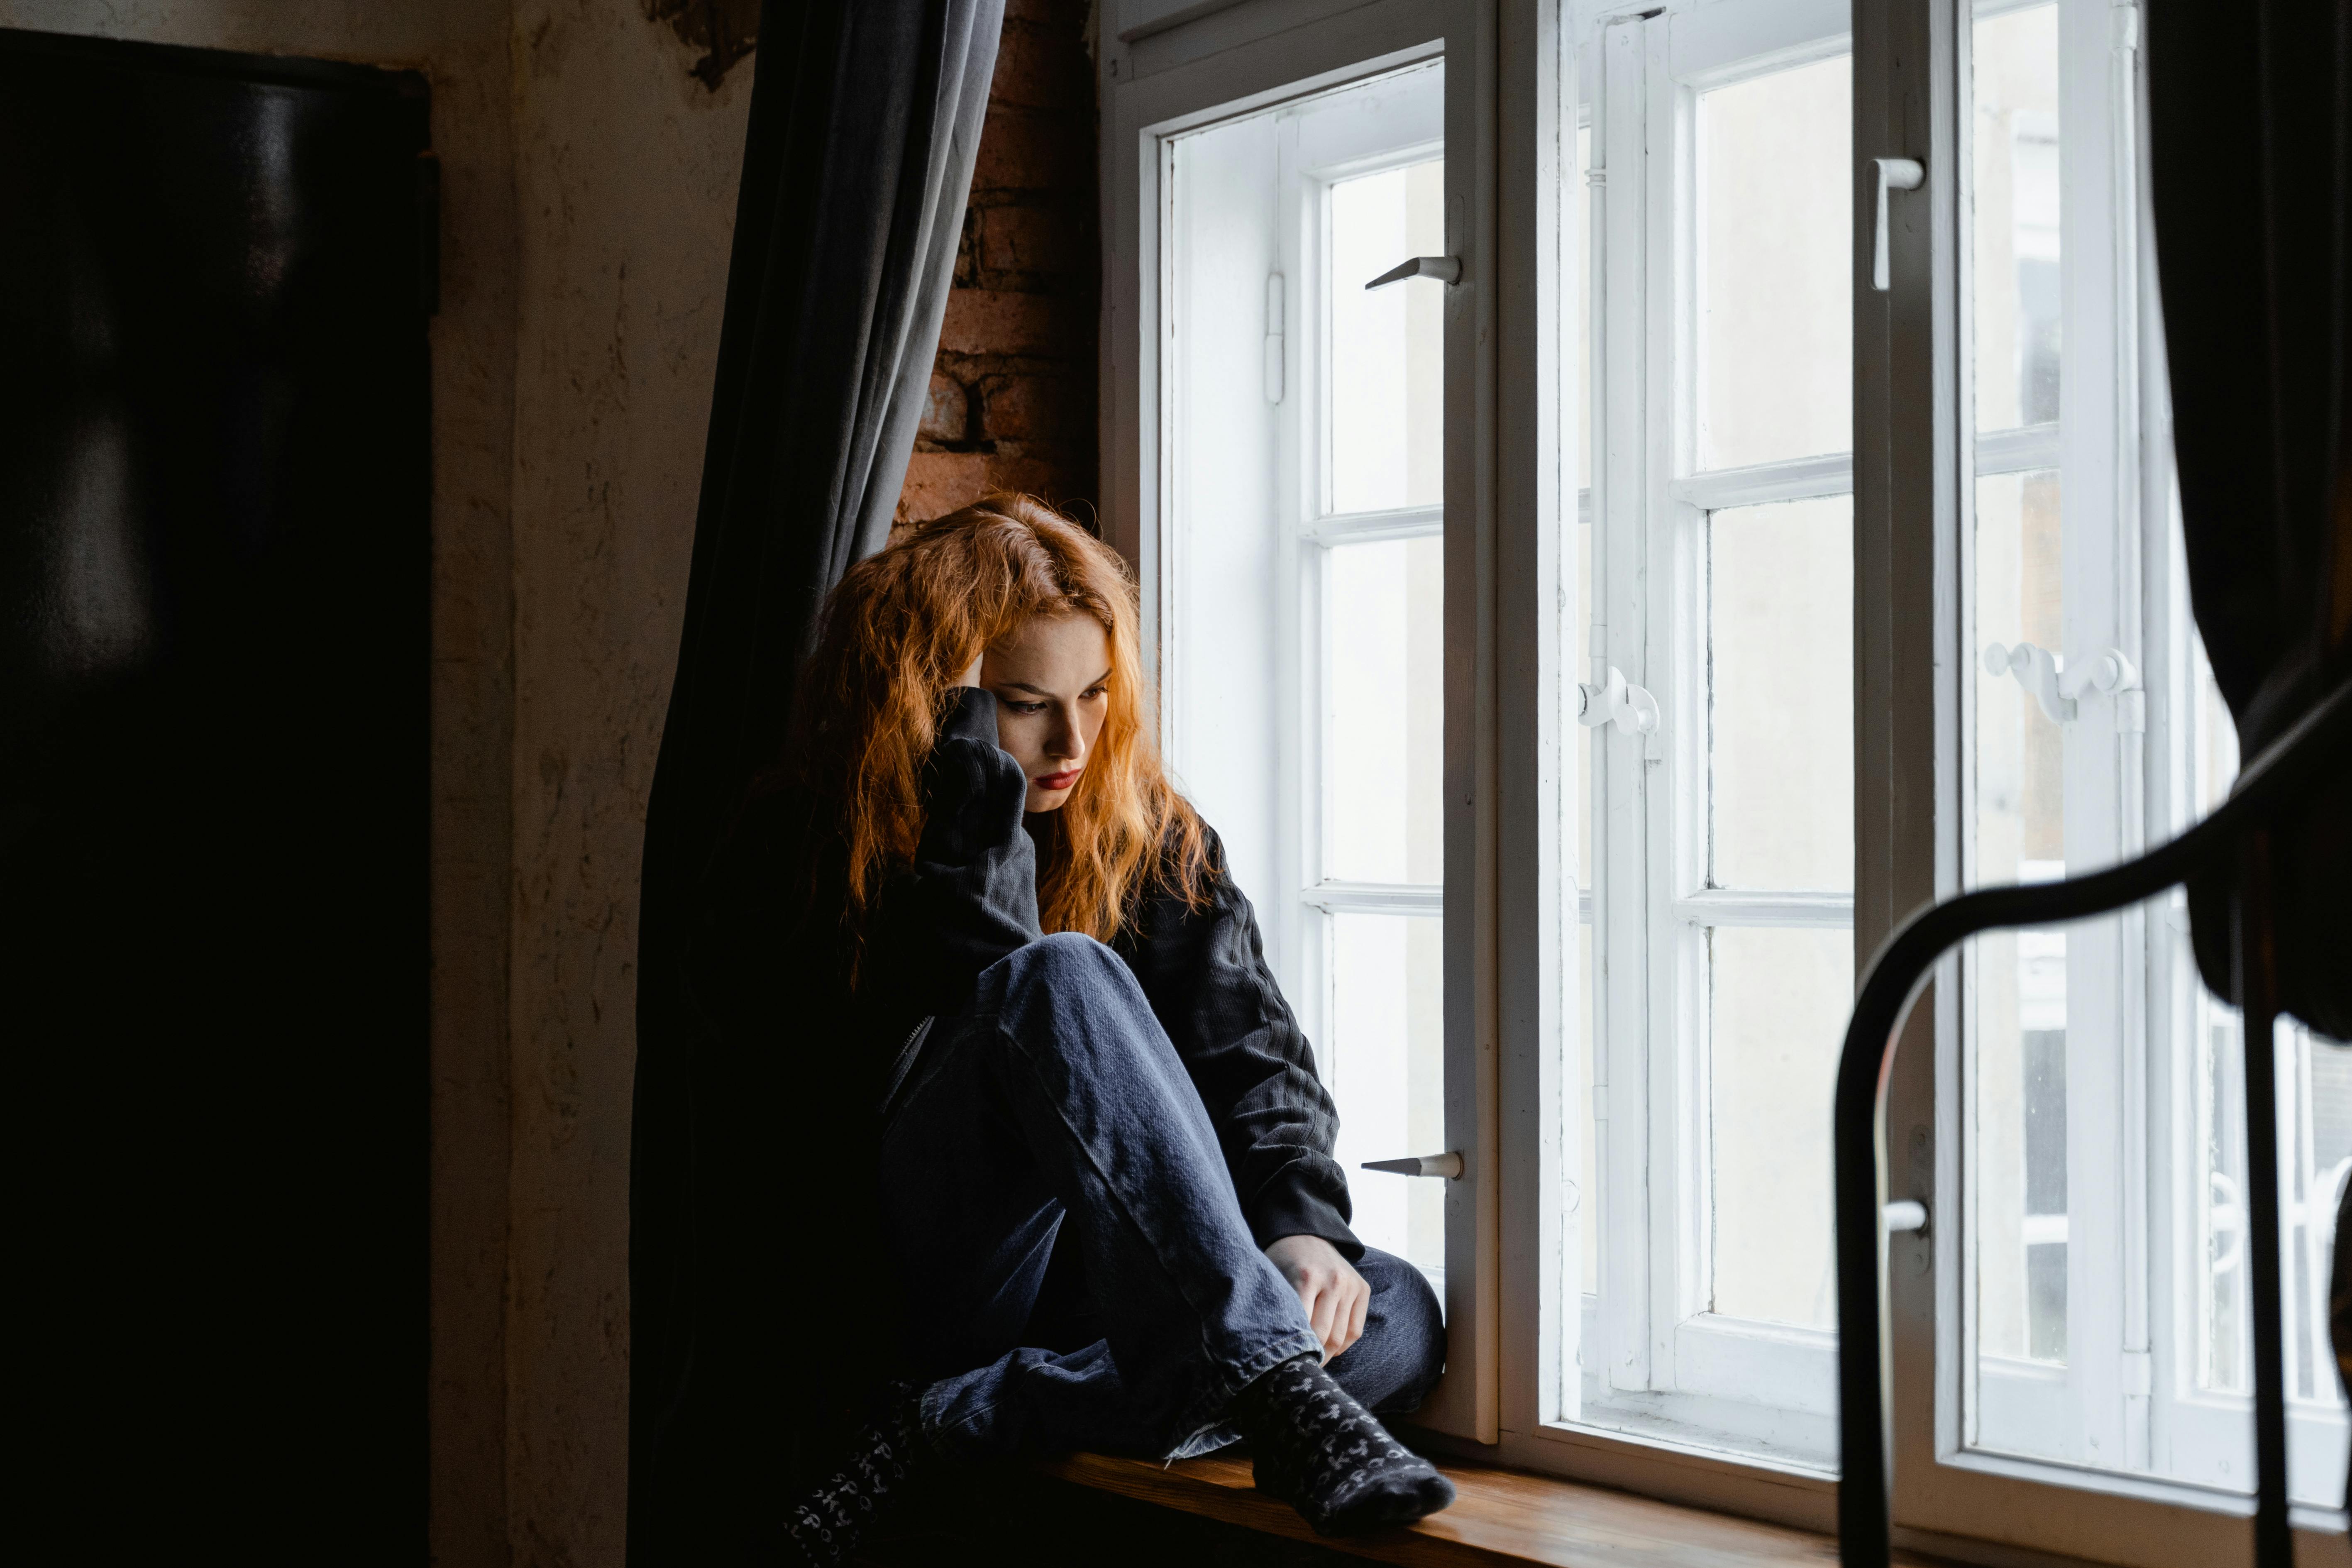 A woman sitting by the window of an apartment | Source: Pexels